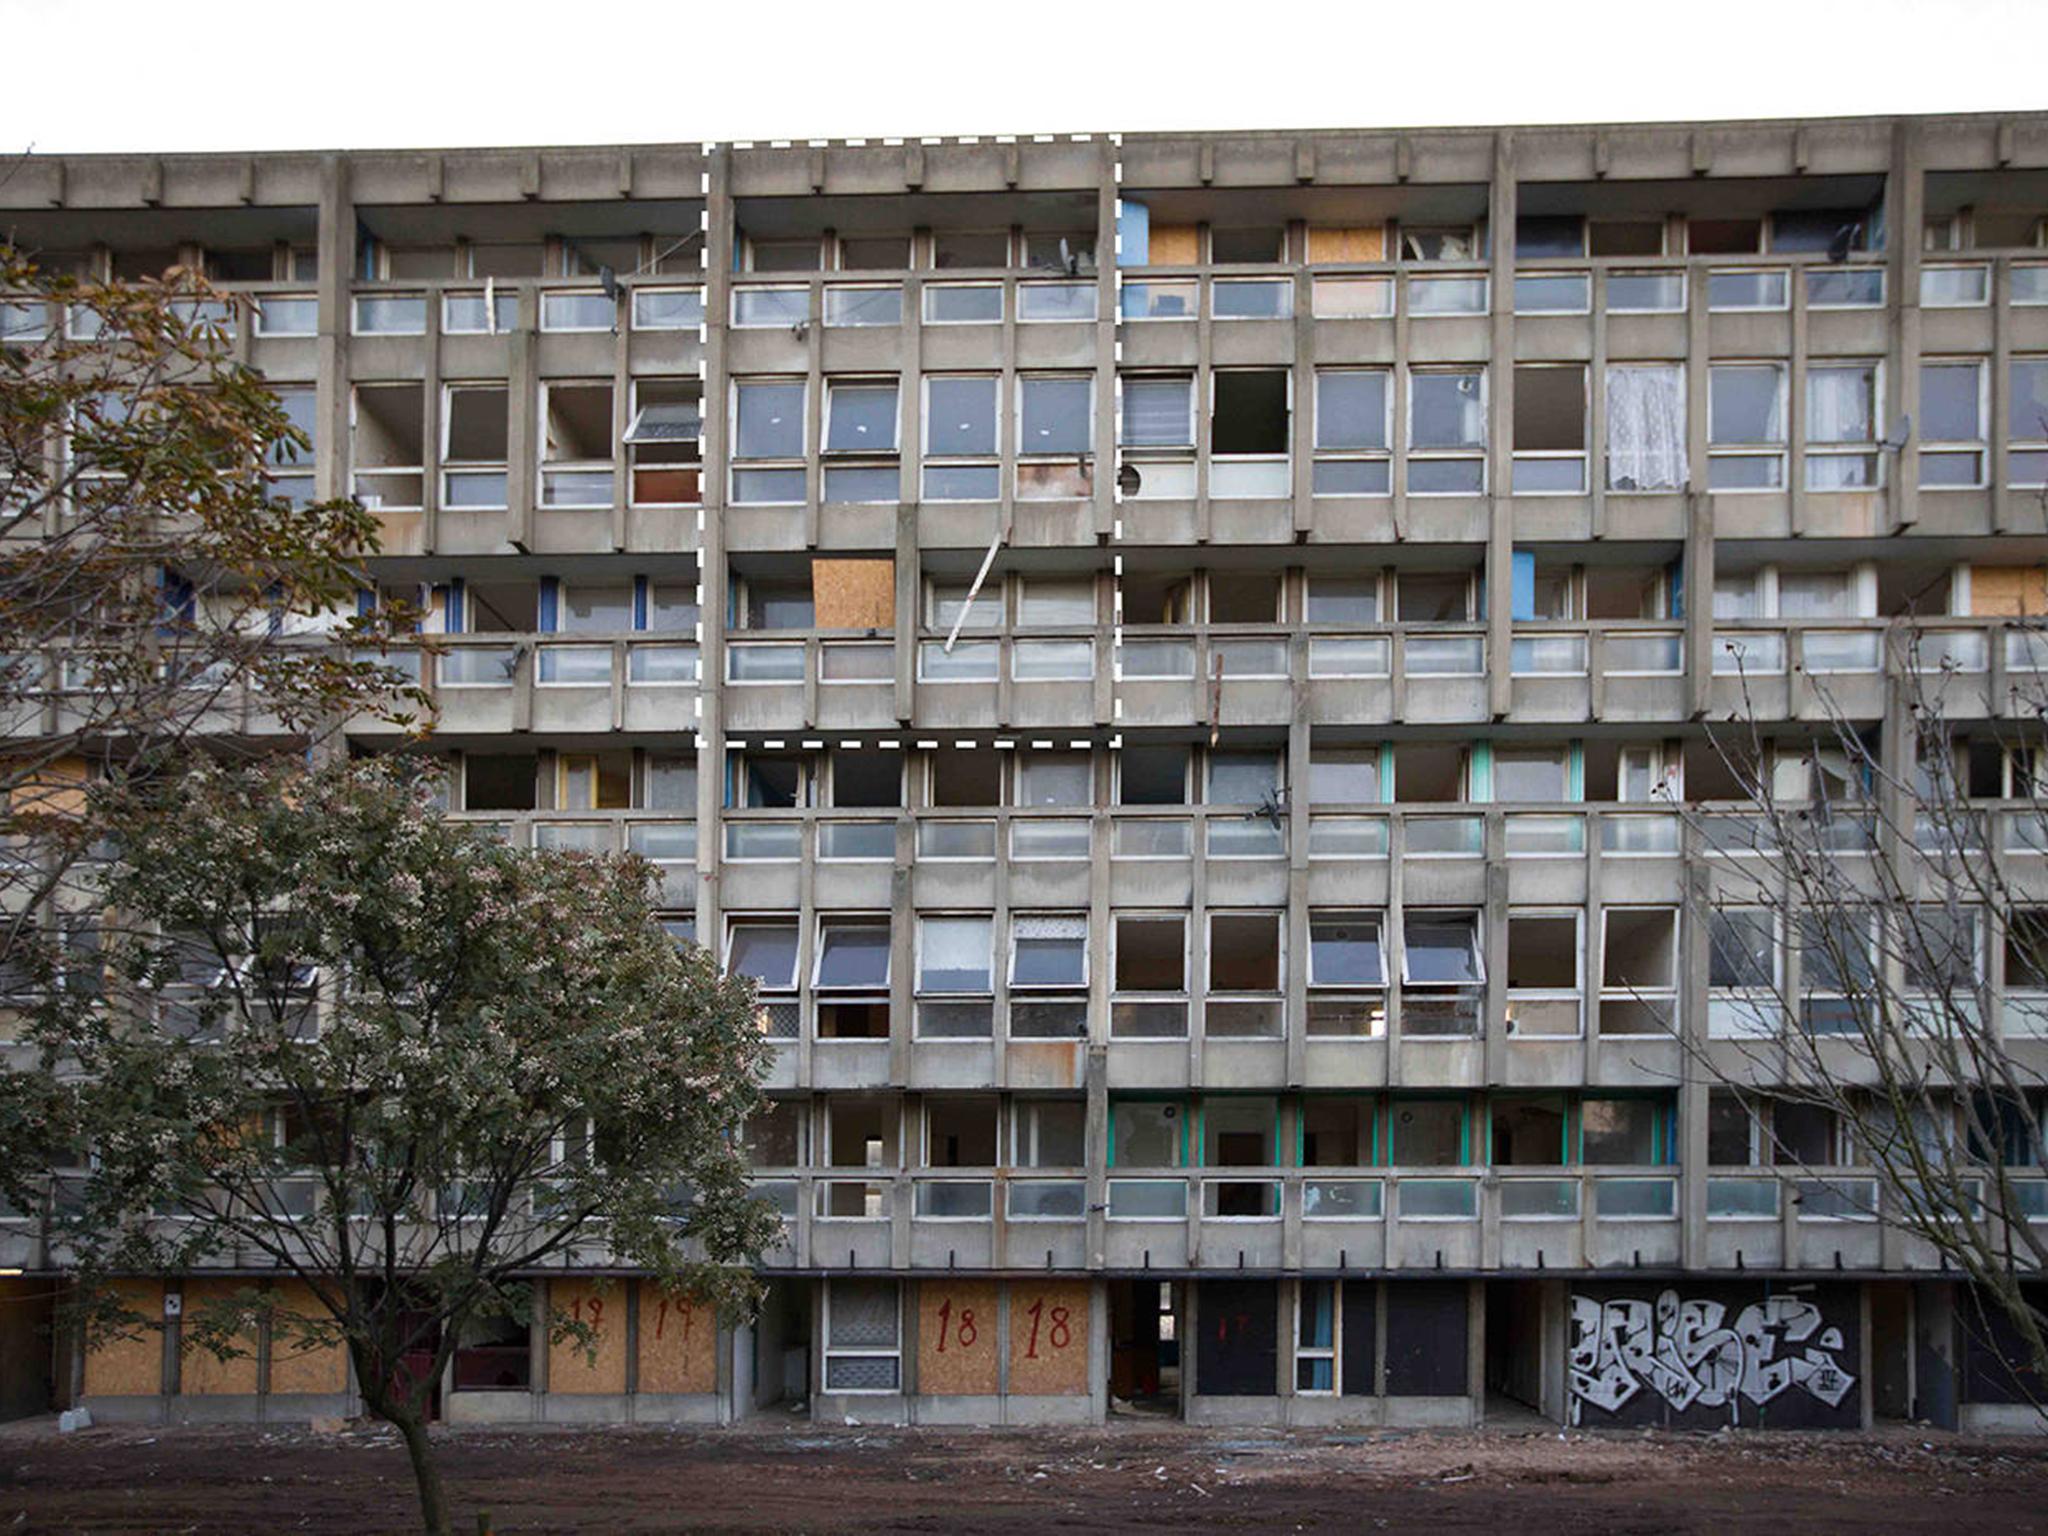 The Robin Hood Gardens estate in Tower Hamlets was completed in 1972 (V&amp;A)